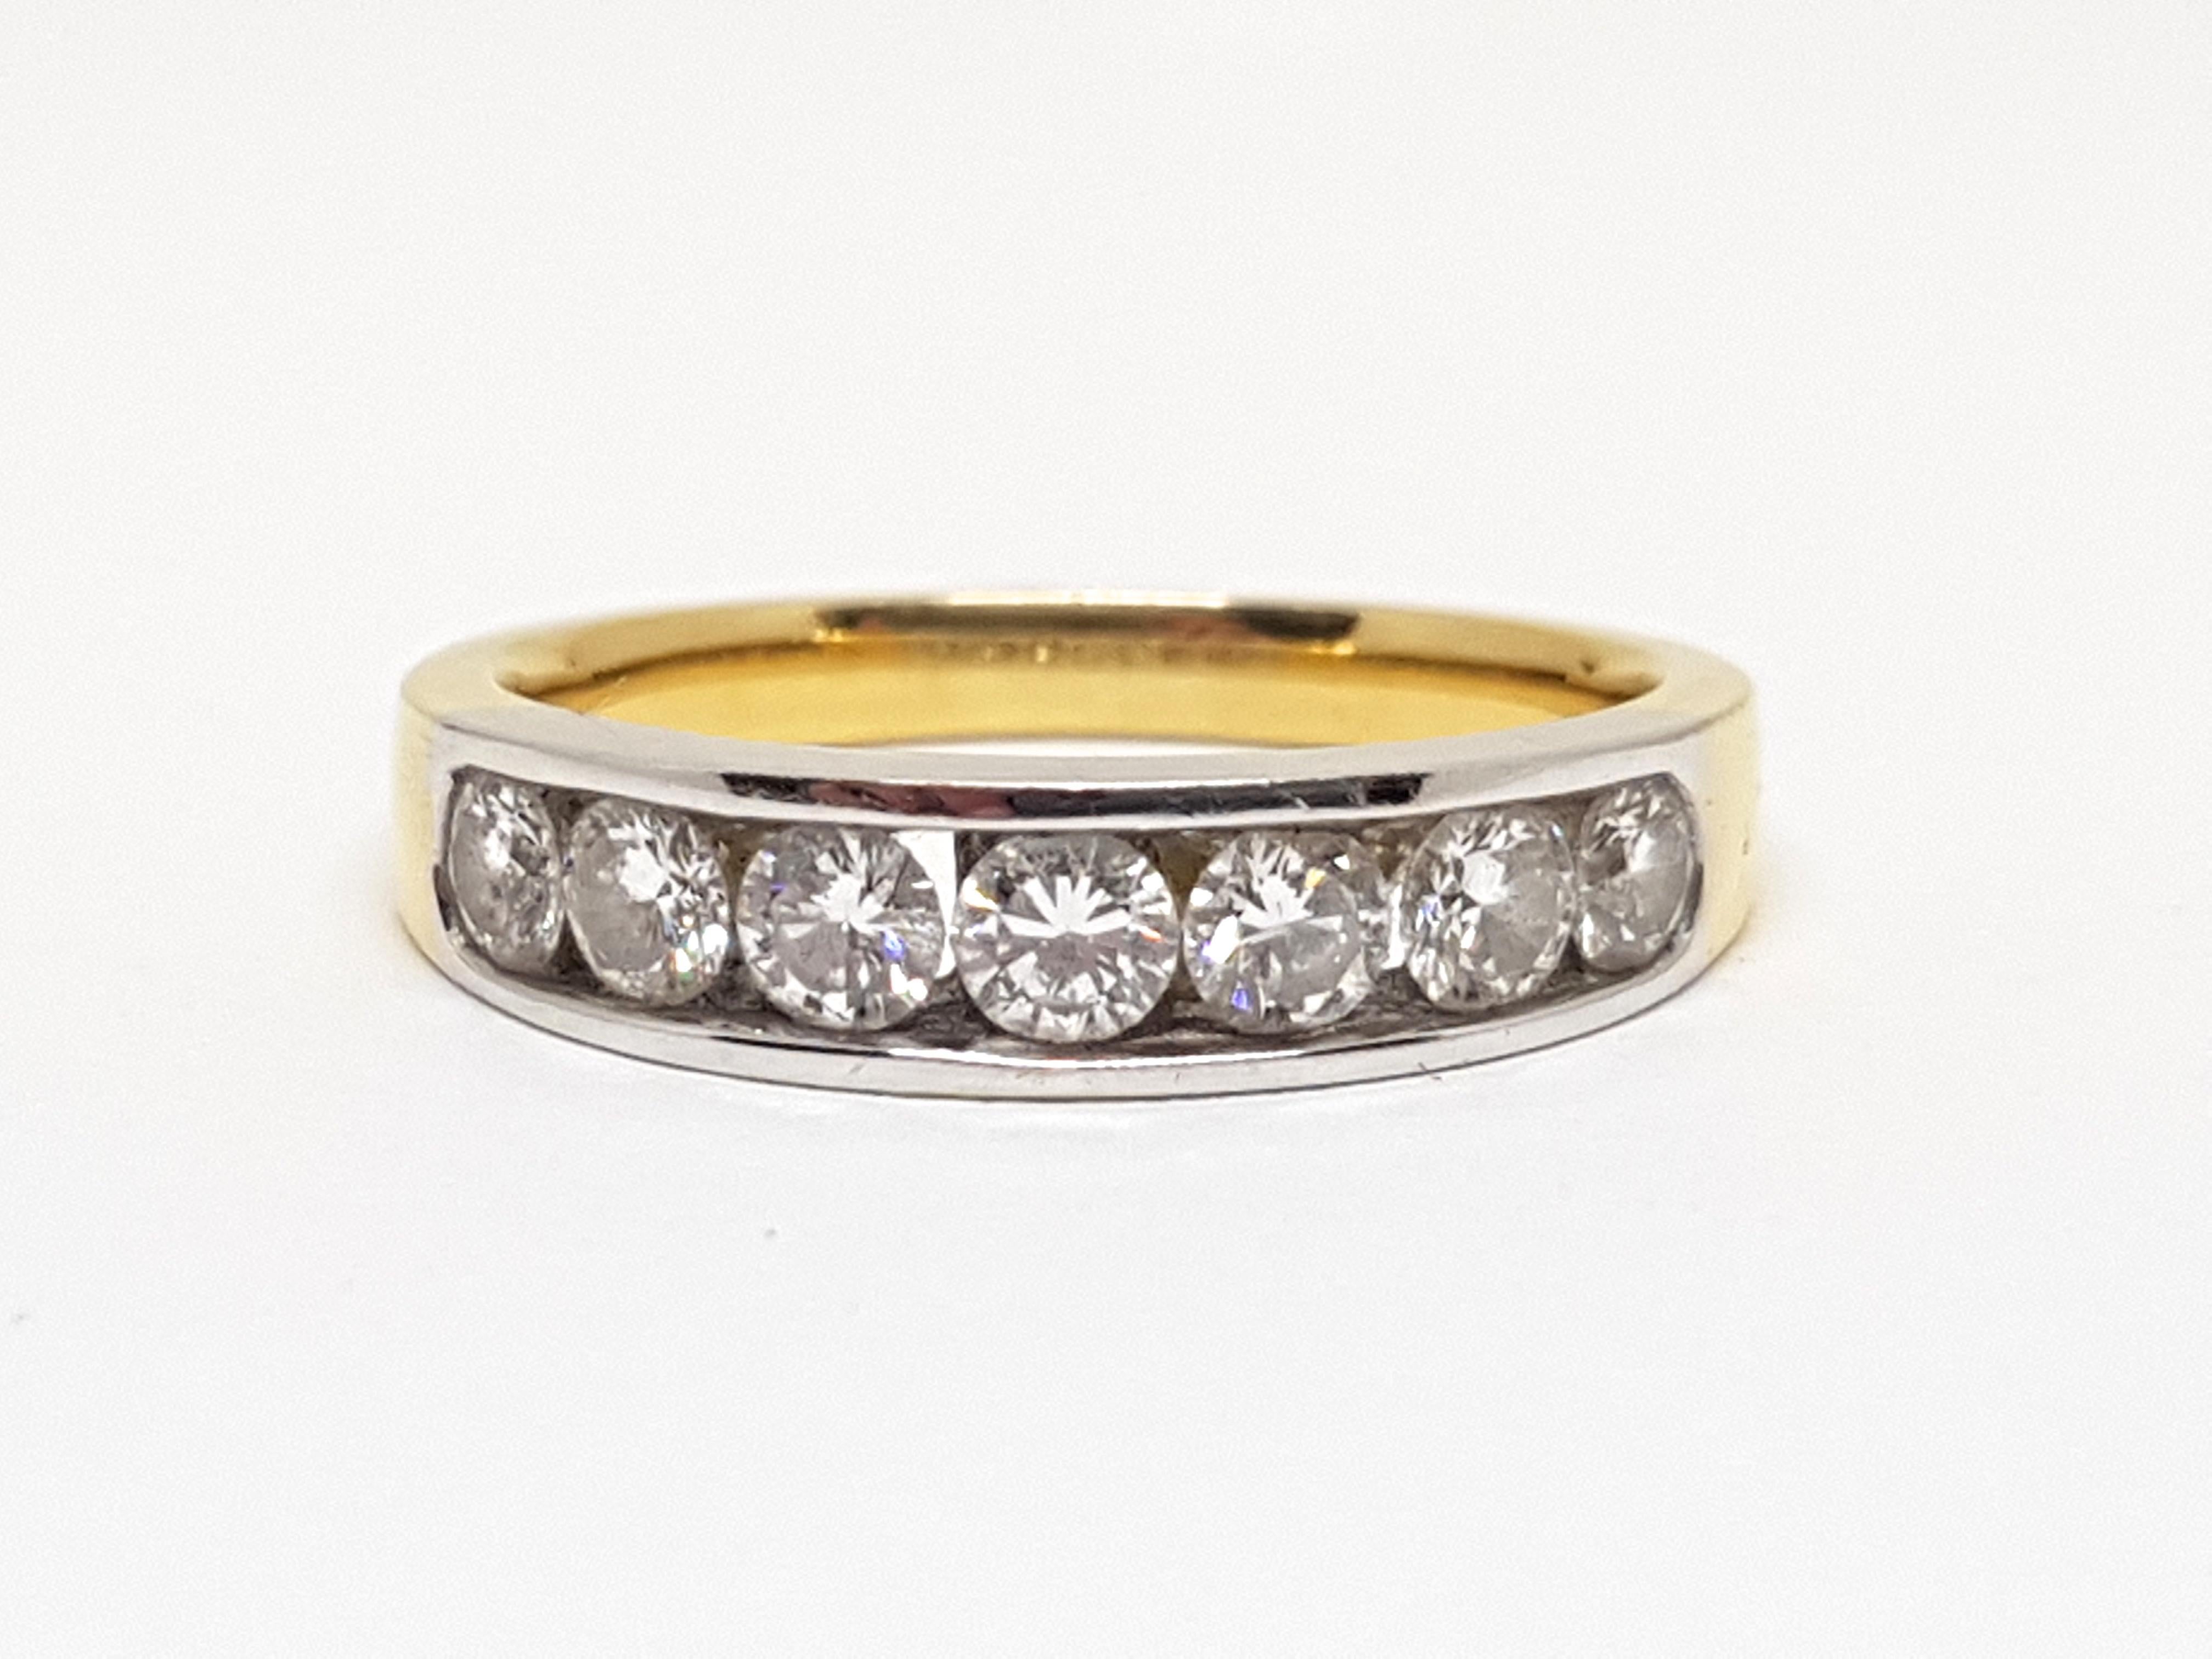 Gold: 18 Karat Yellow & White Gold 
Weight: 4.12 grams.
Diamonds: 1.20 ct. Color: F clarity: VS1
Width: 0.177 inches.
Ring size: US 7.00
Free resizing of Ring up to size US 13
All our jewellery comes with a certificate and 5 years guarantee 
Please